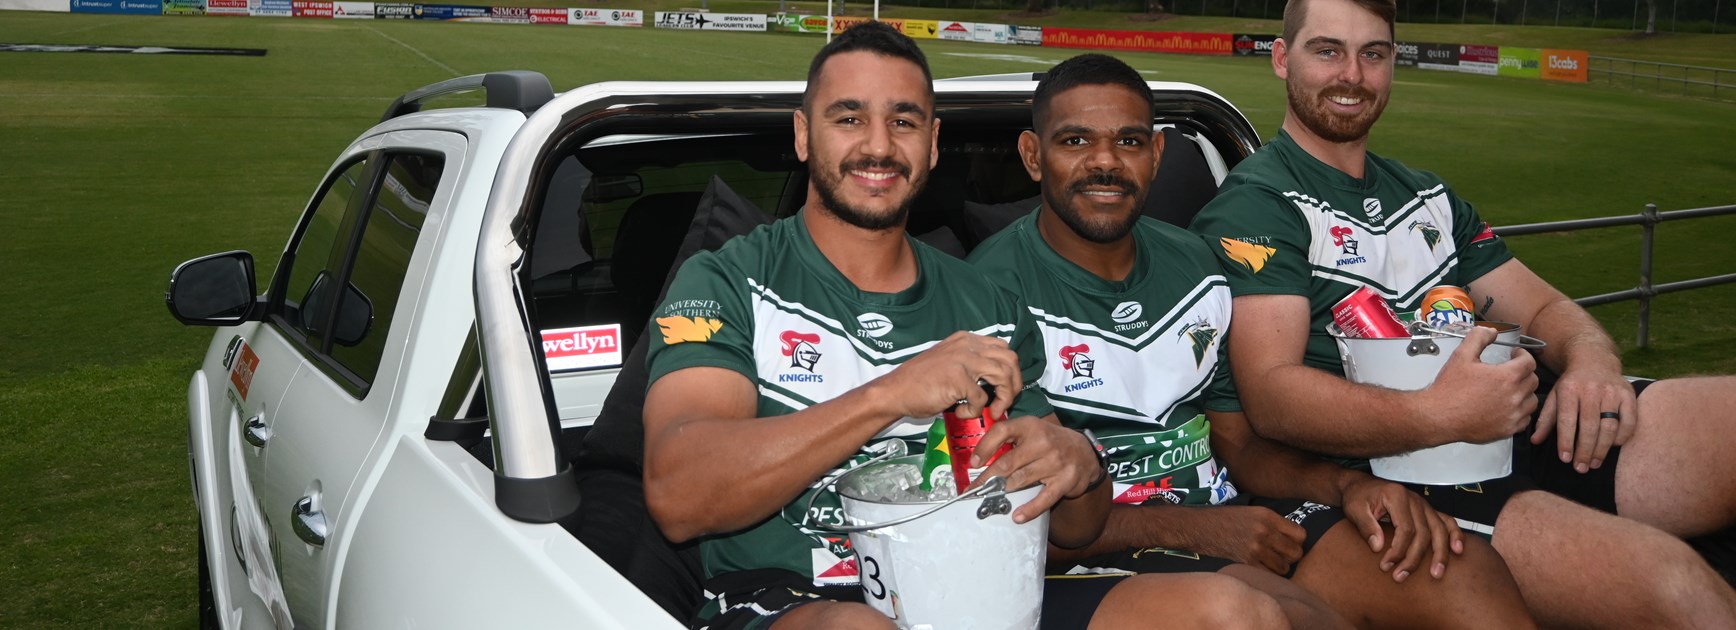 Jayden Conners, Kierran Moseley and Tod White from Ipswich Jets are excited for the tailgate party at North Ipswich Reserve. Photo: Ipswich Jets